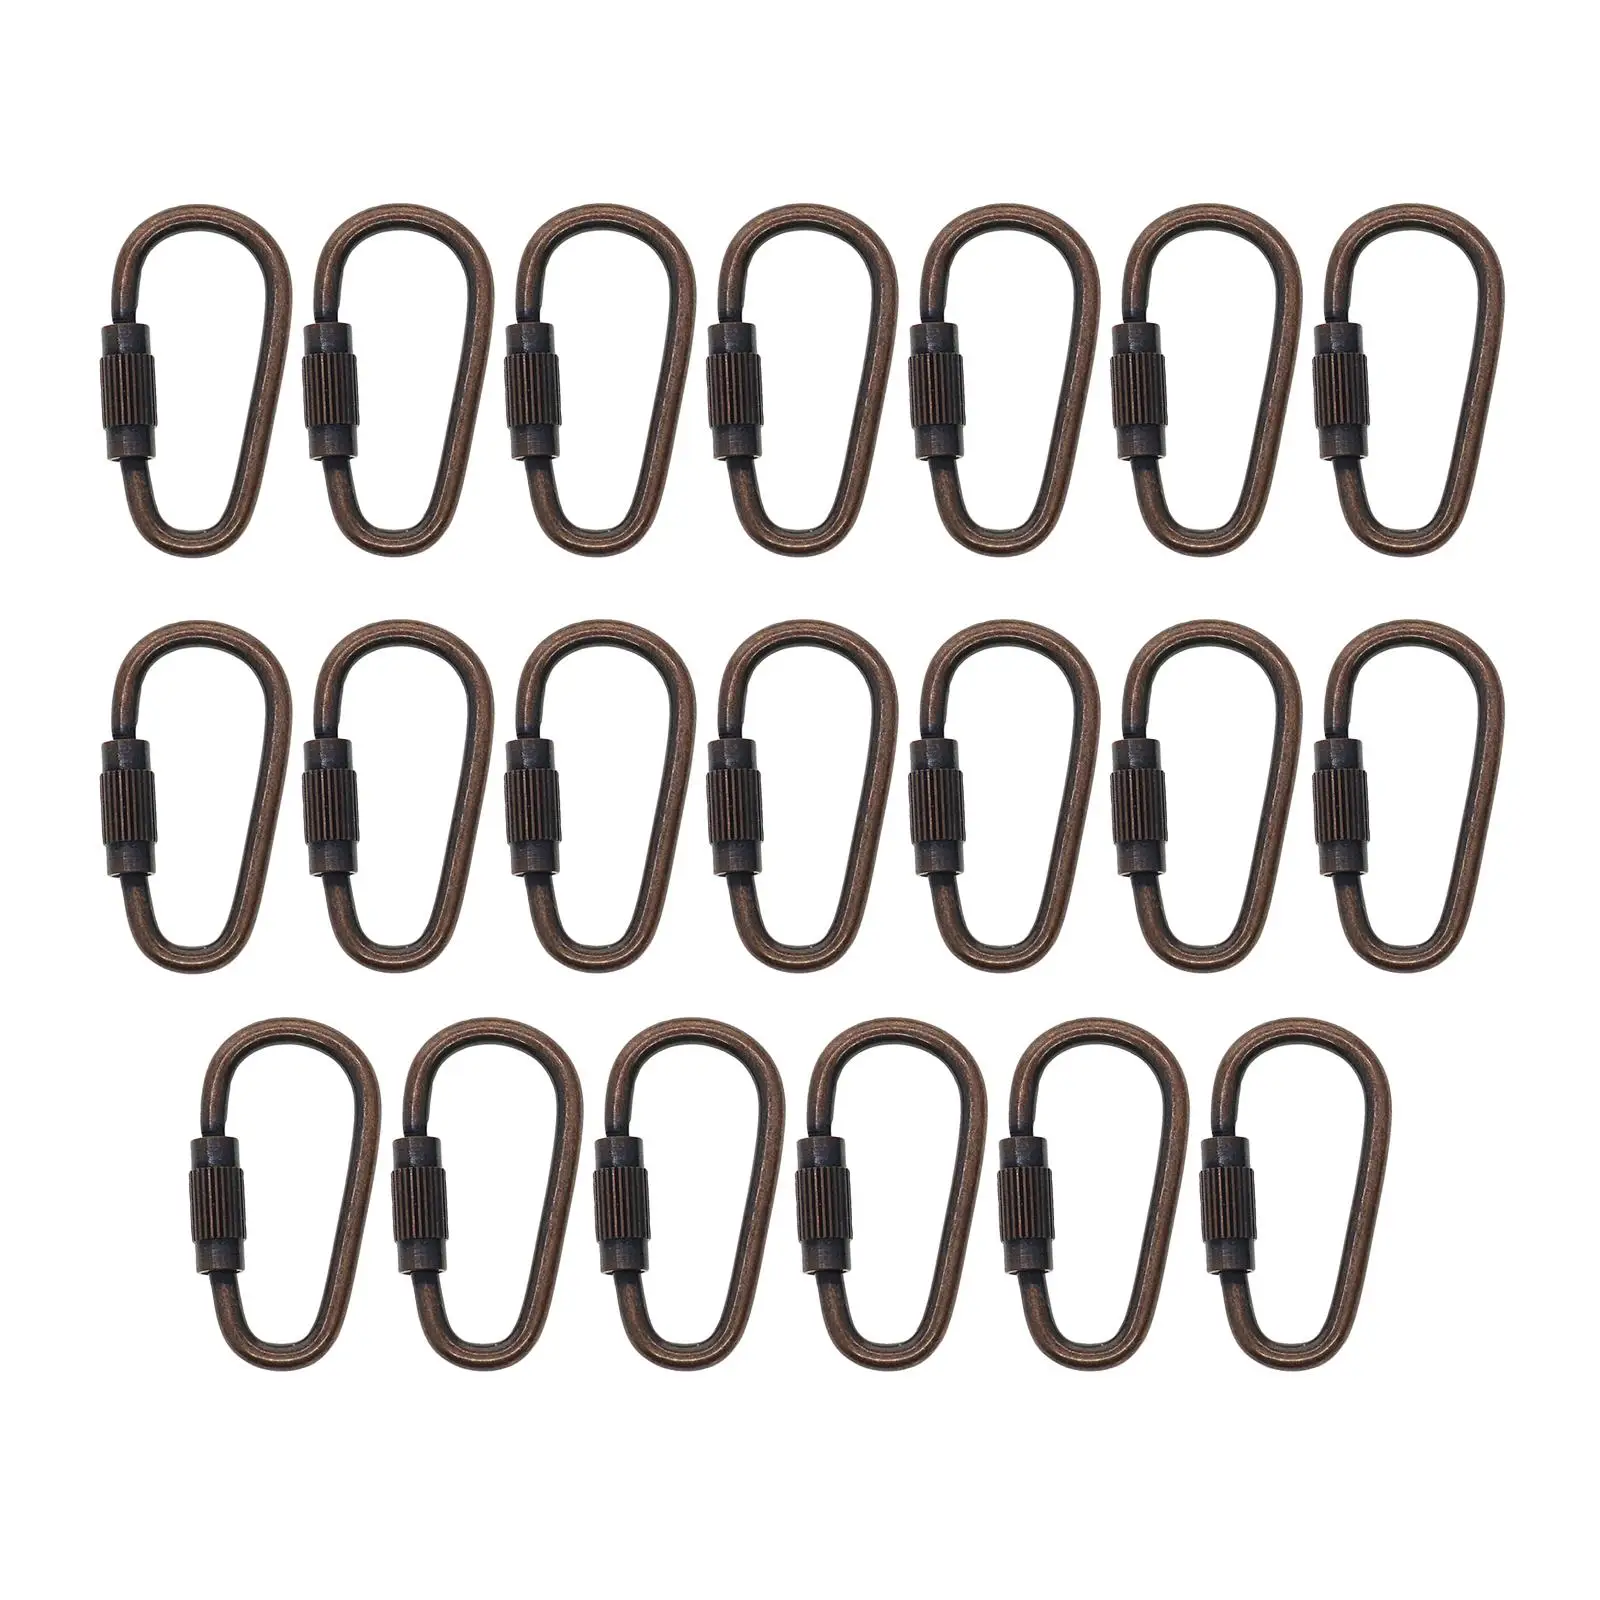 20 Pieces Mini Steel Locking Clips Durable D Ring Carabiners DIY Keychain Clips